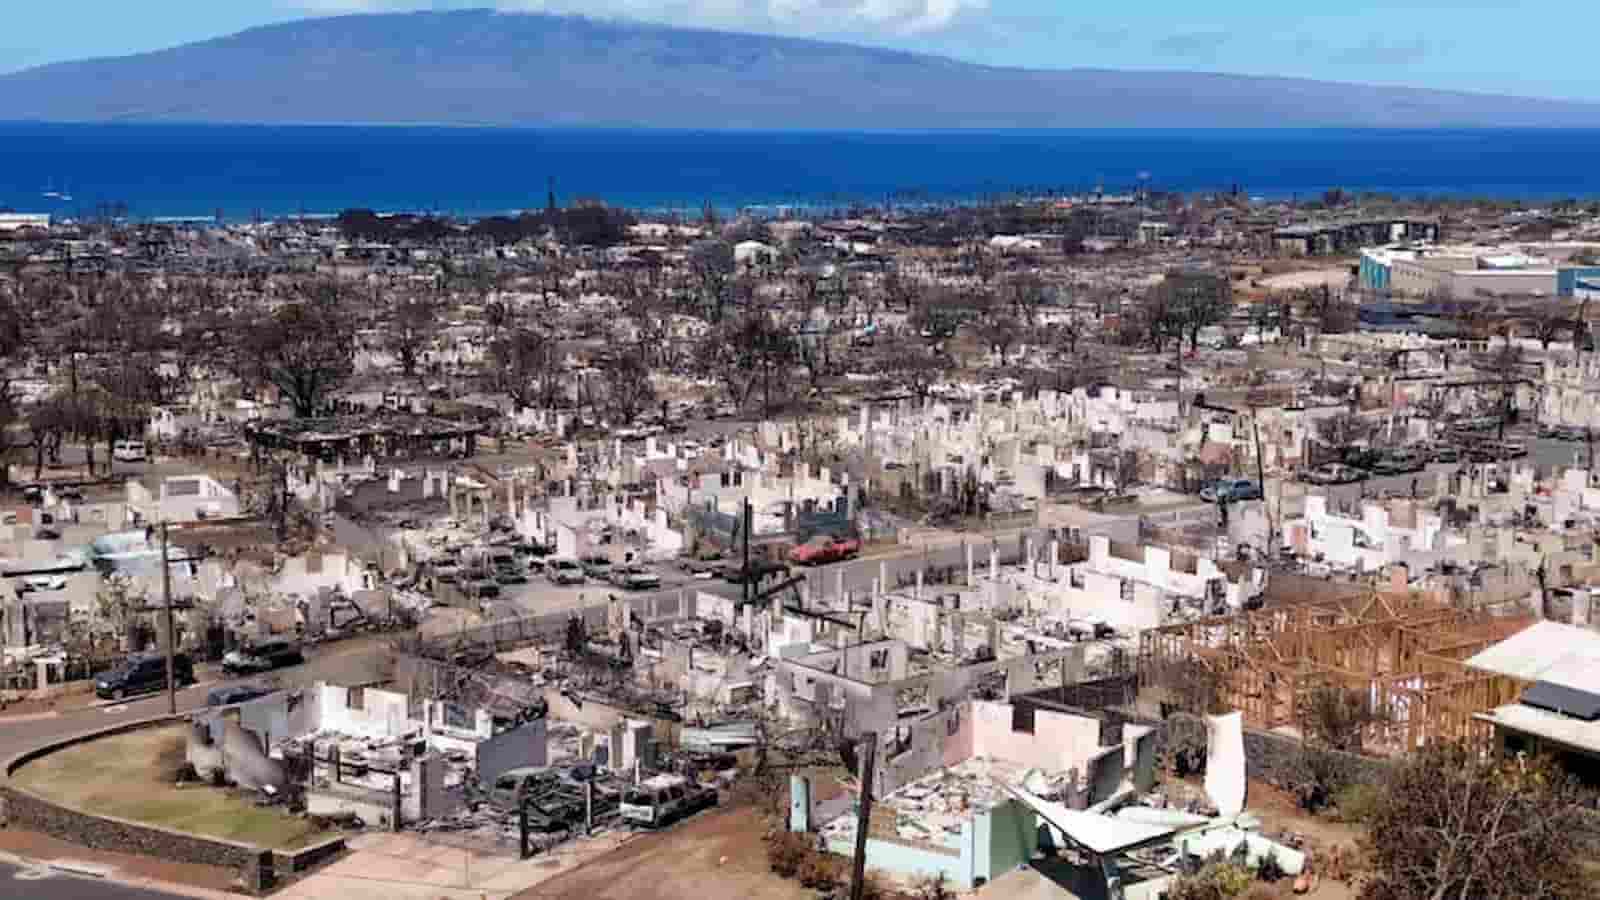 Lahaina Recovery: Businesses and residents return following wildfire damage